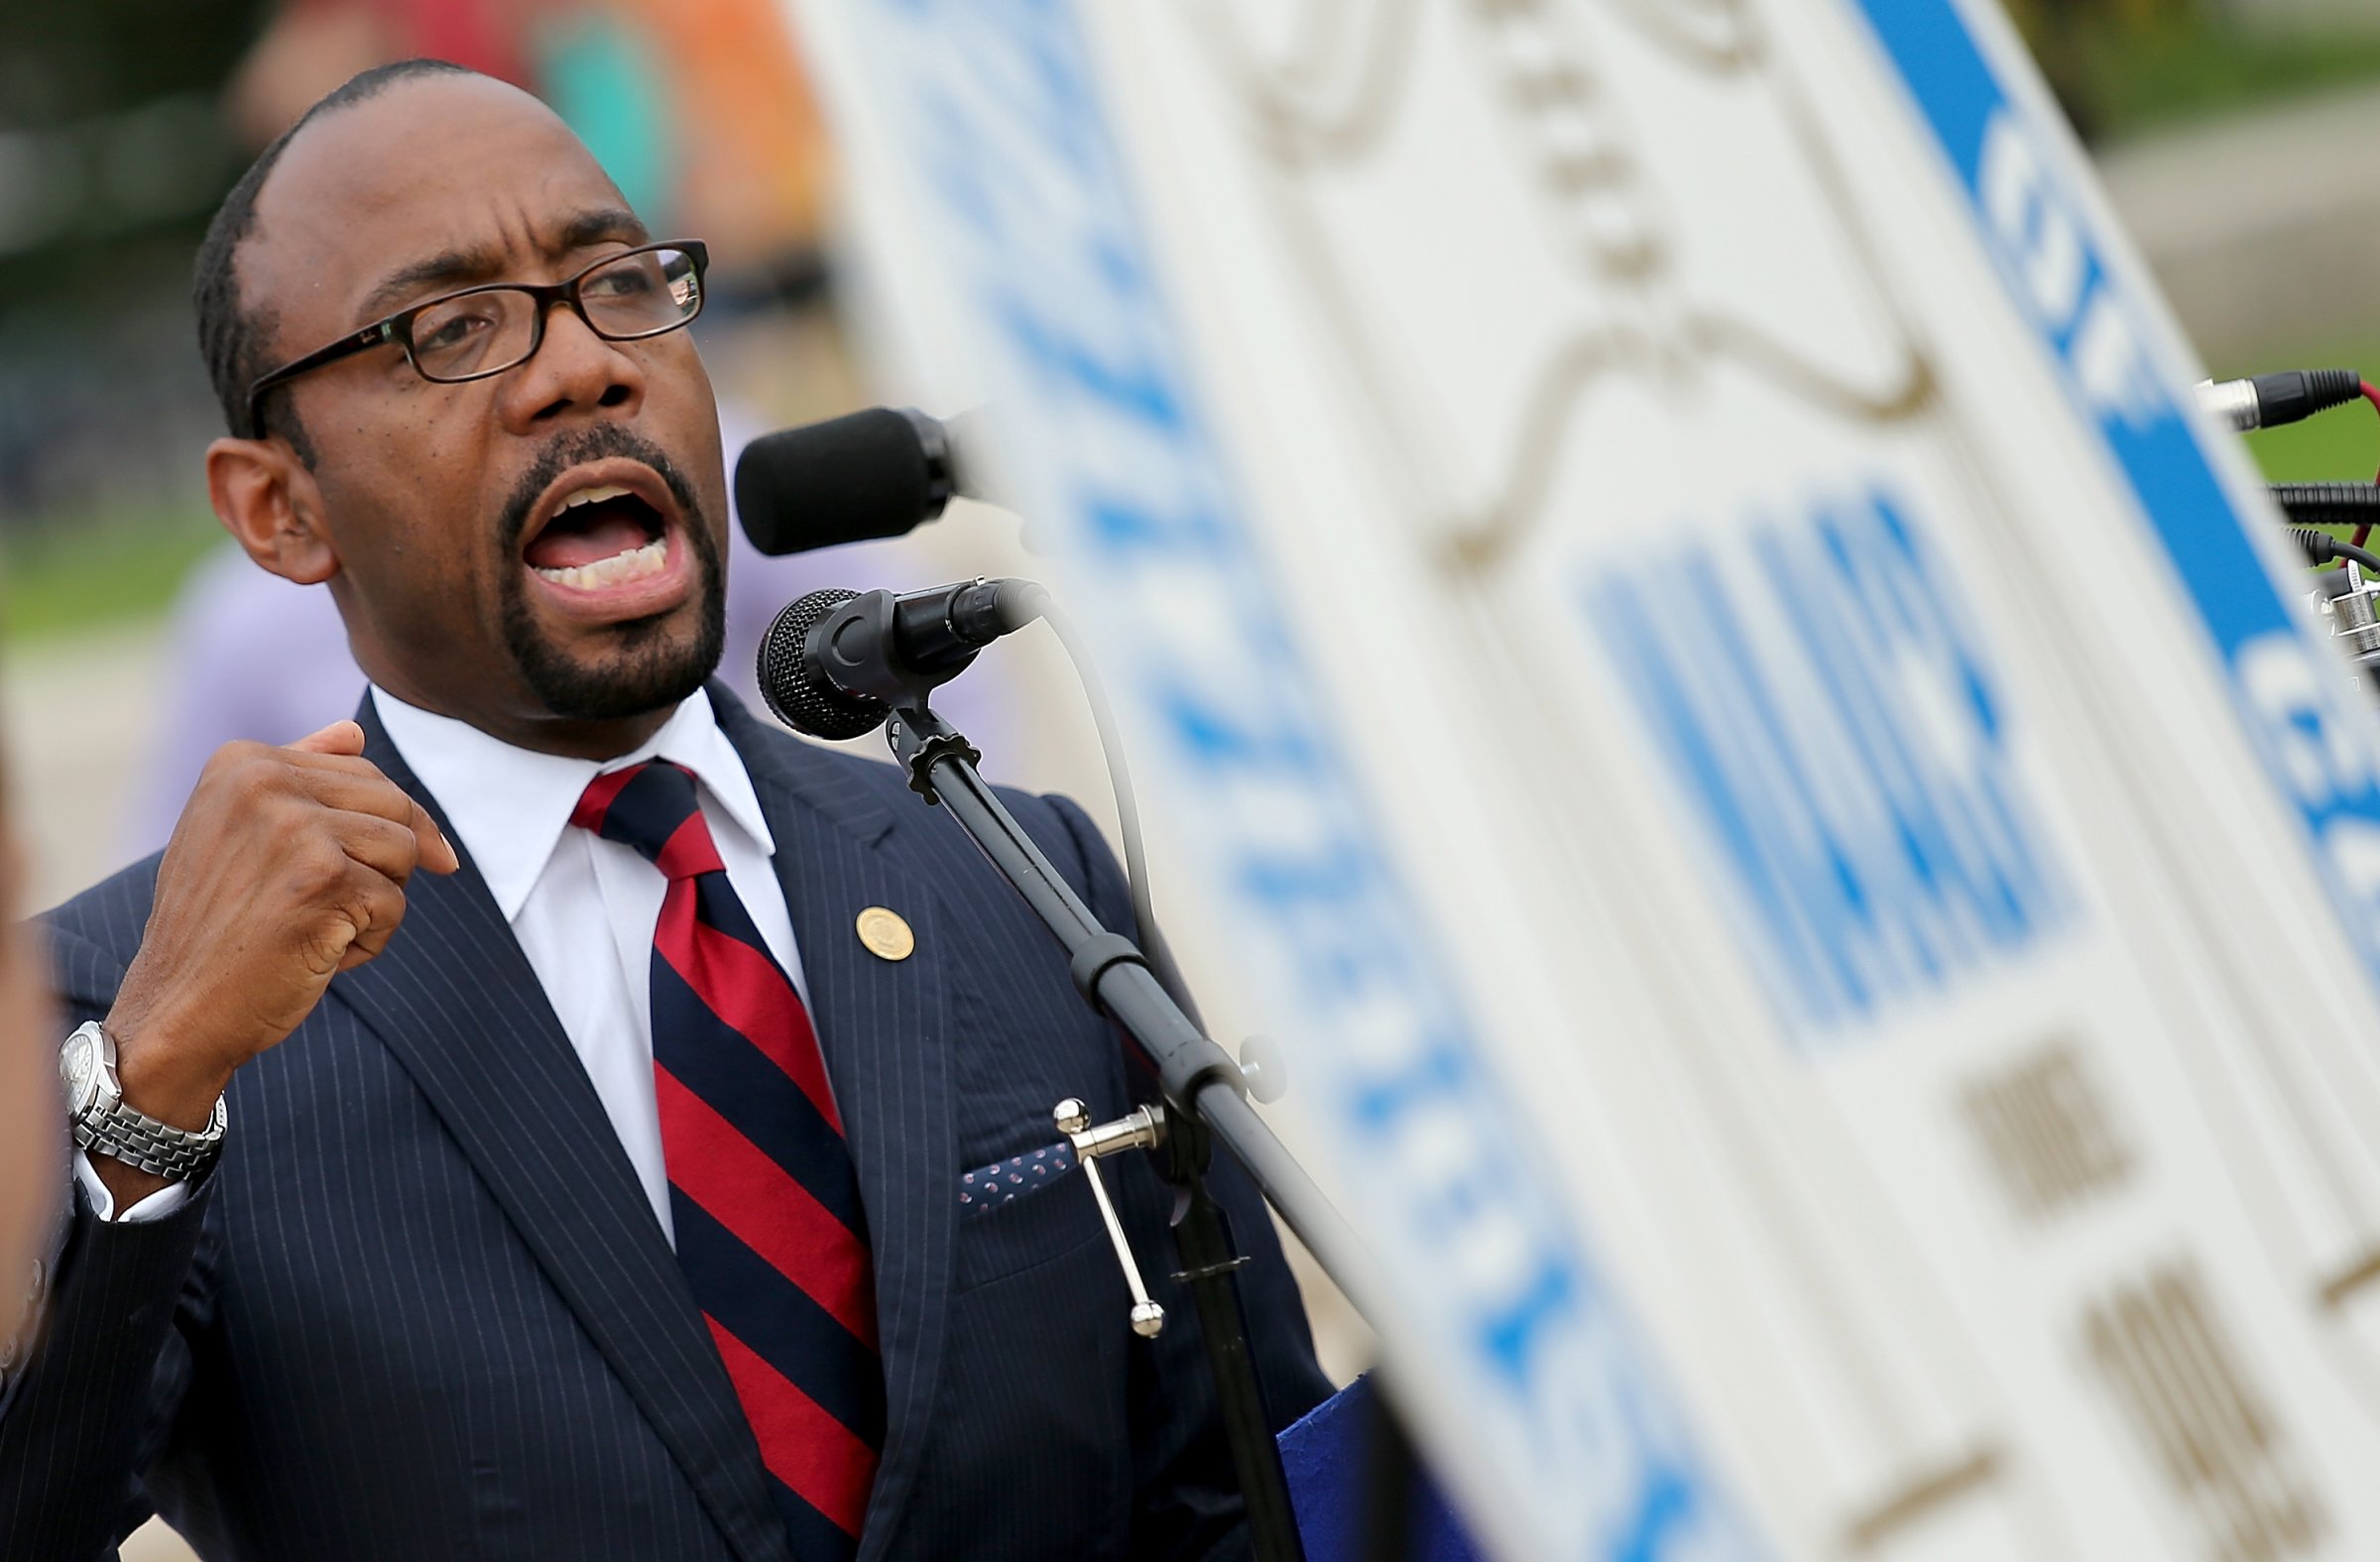 NAACP President Cornell William Brooks Discusses August March From Selma To D.C.